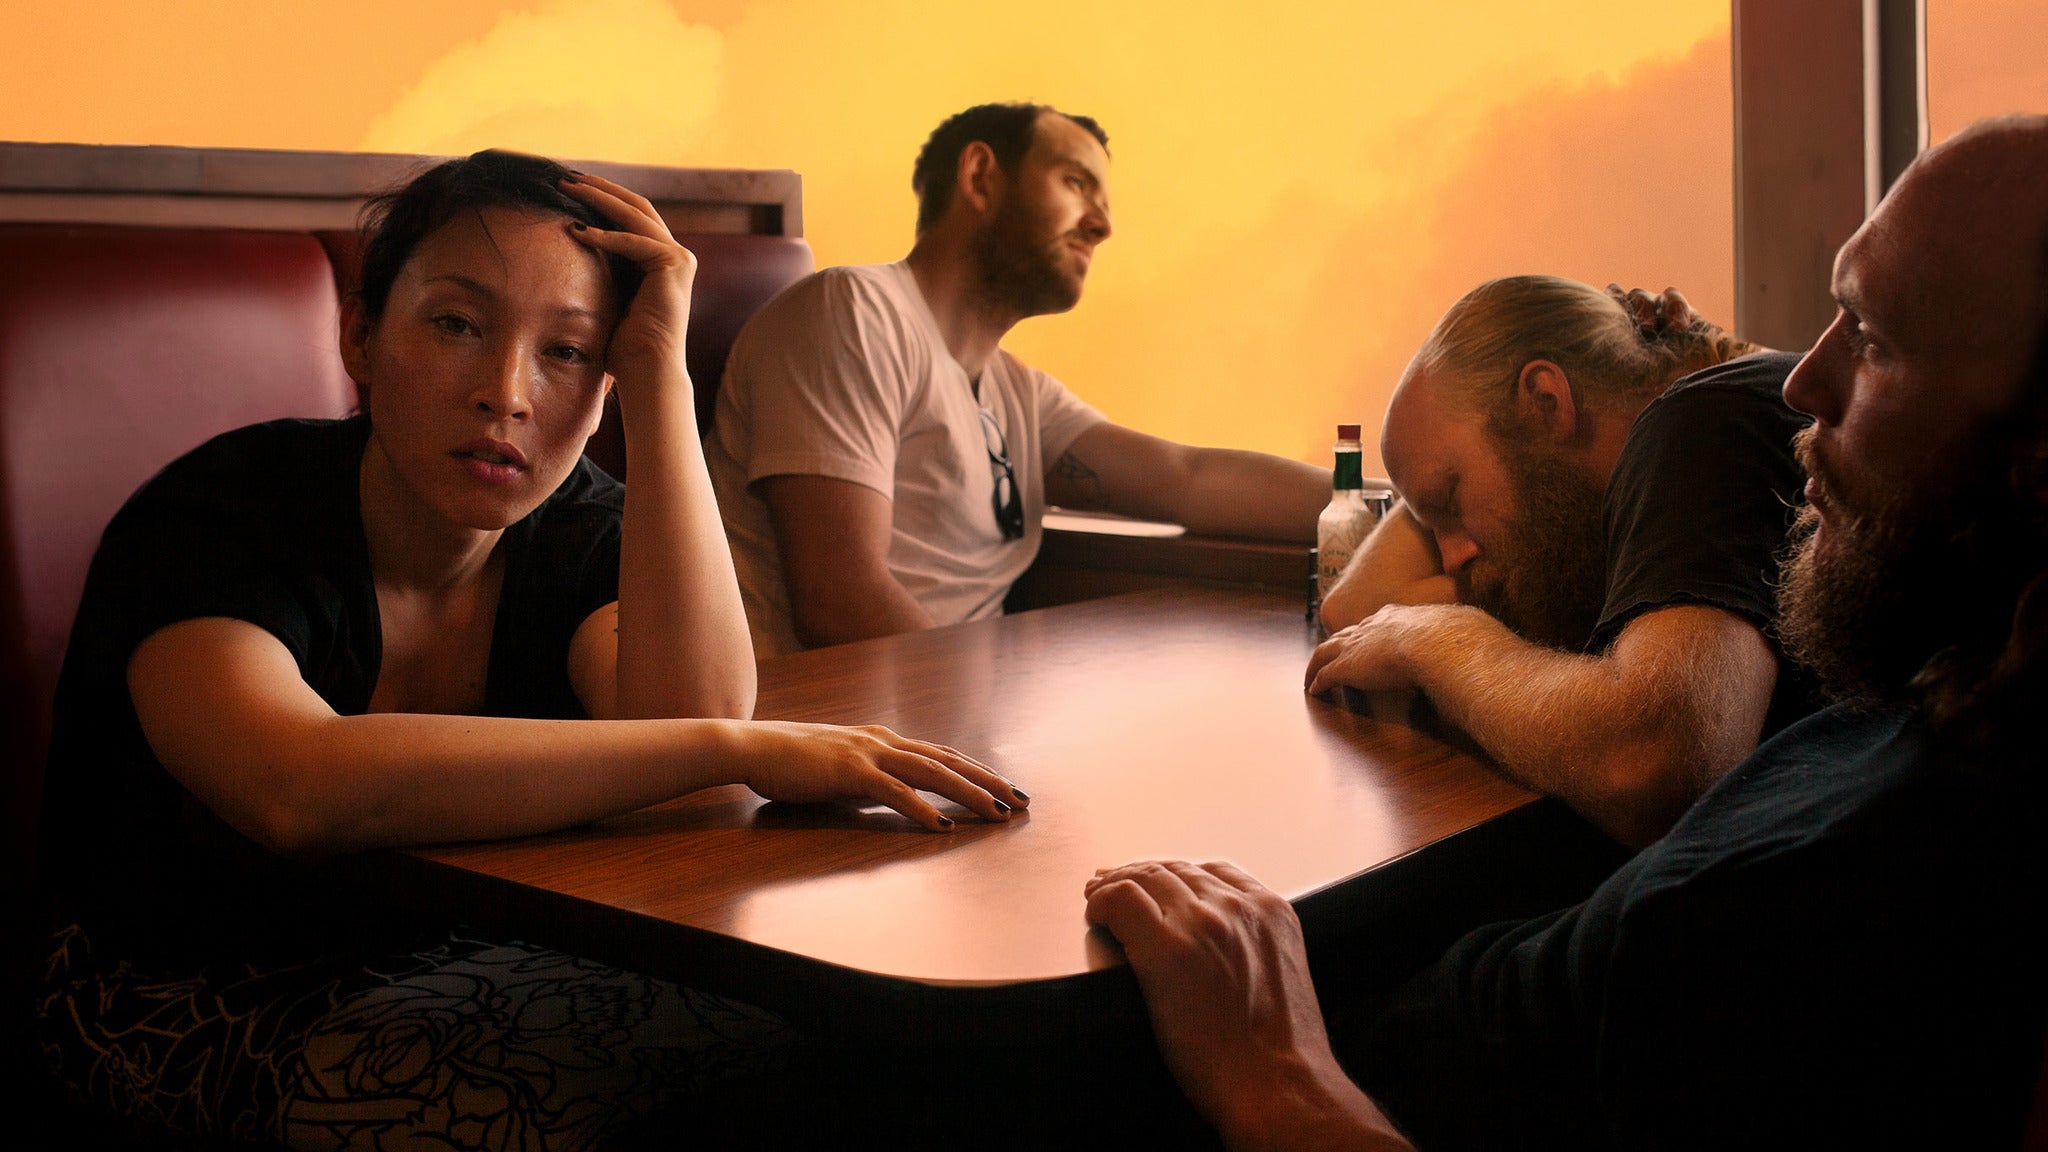 Image used with permission from Ticketmaster | Little Dragon tickets